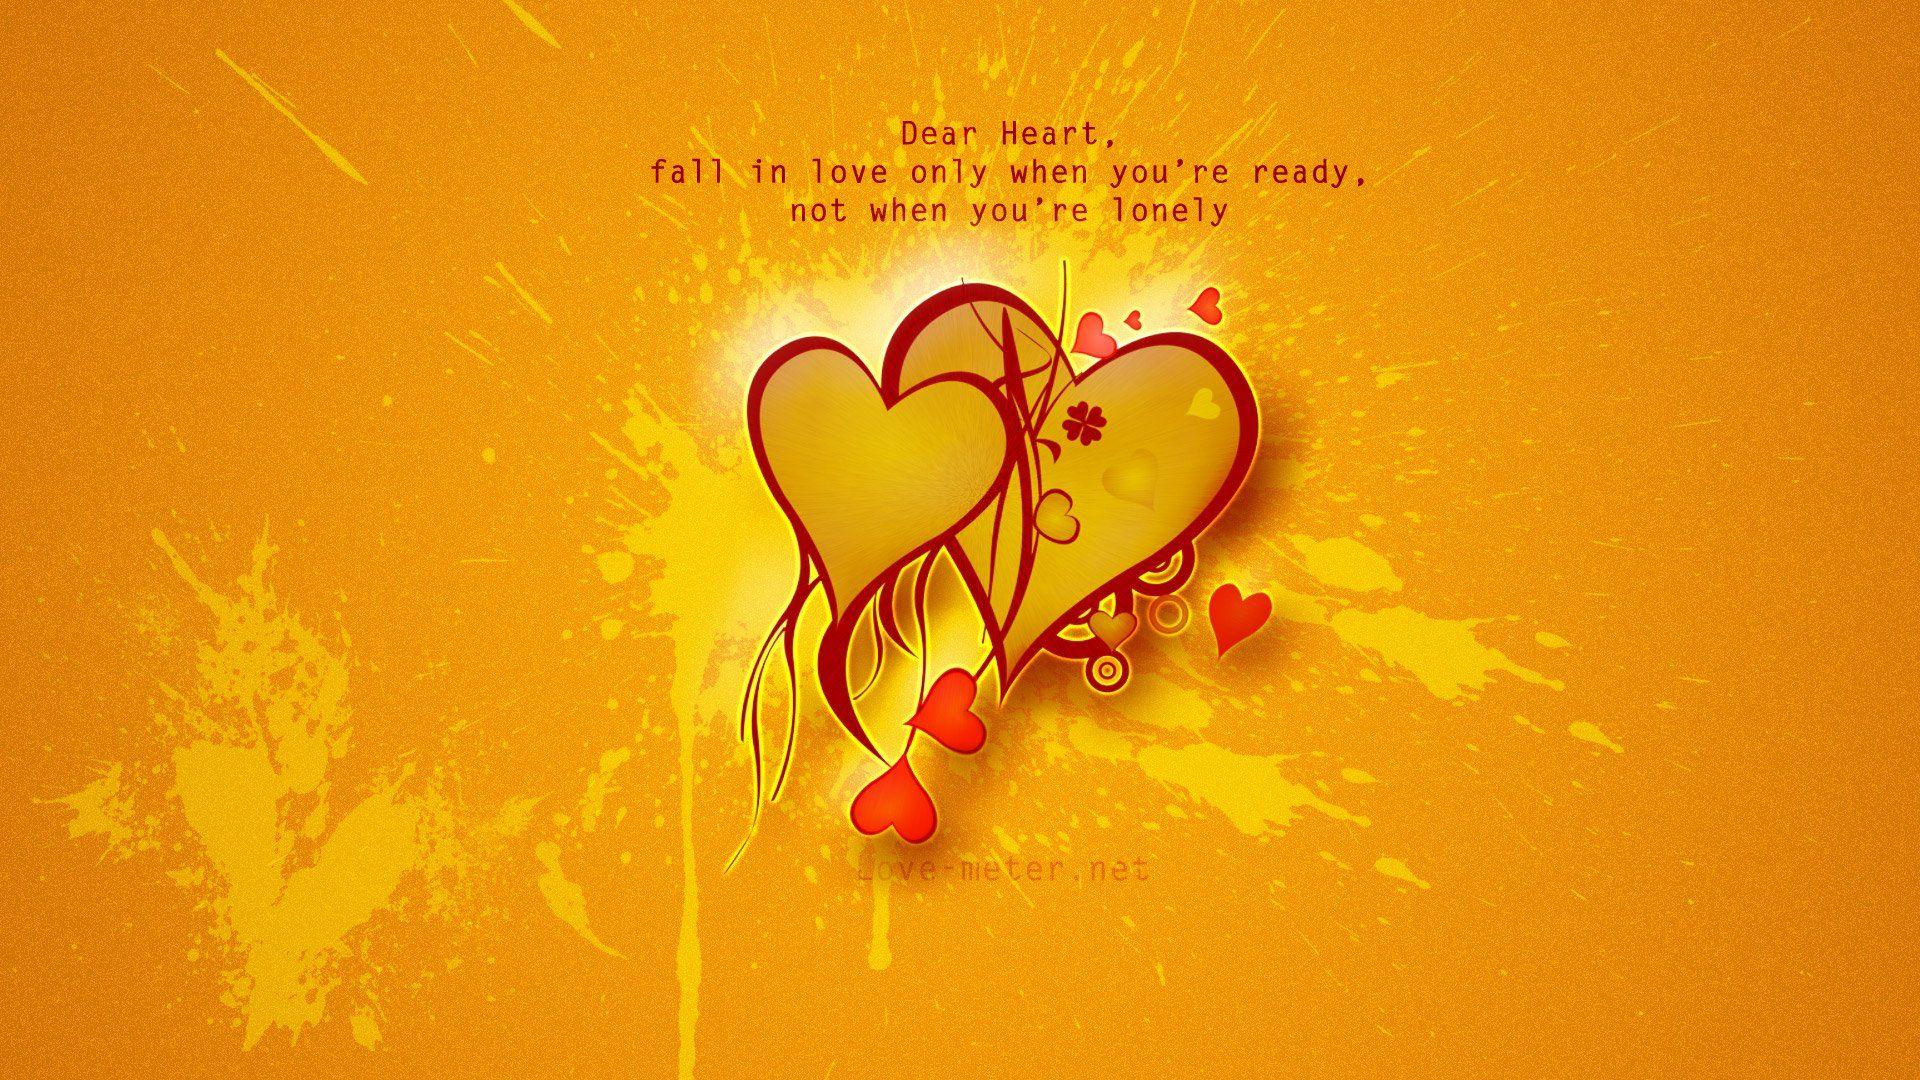 Download Beautiful Wallpaper With Love Quotes